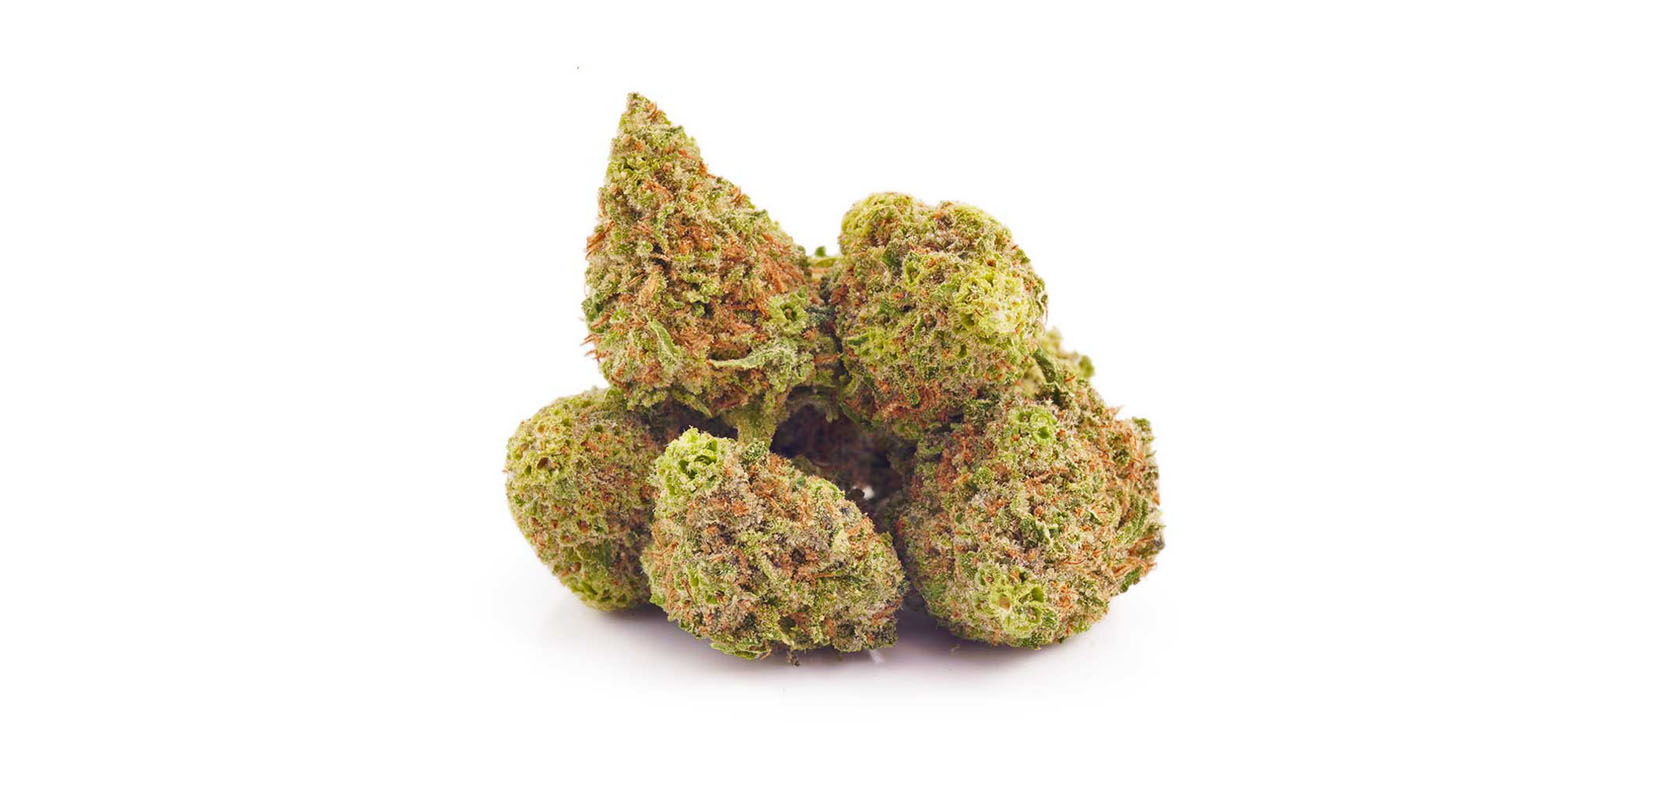 Runtz weed online Canada from Low Price Bud online weed dispensary for mail order marijuana and cheap weed online canada.